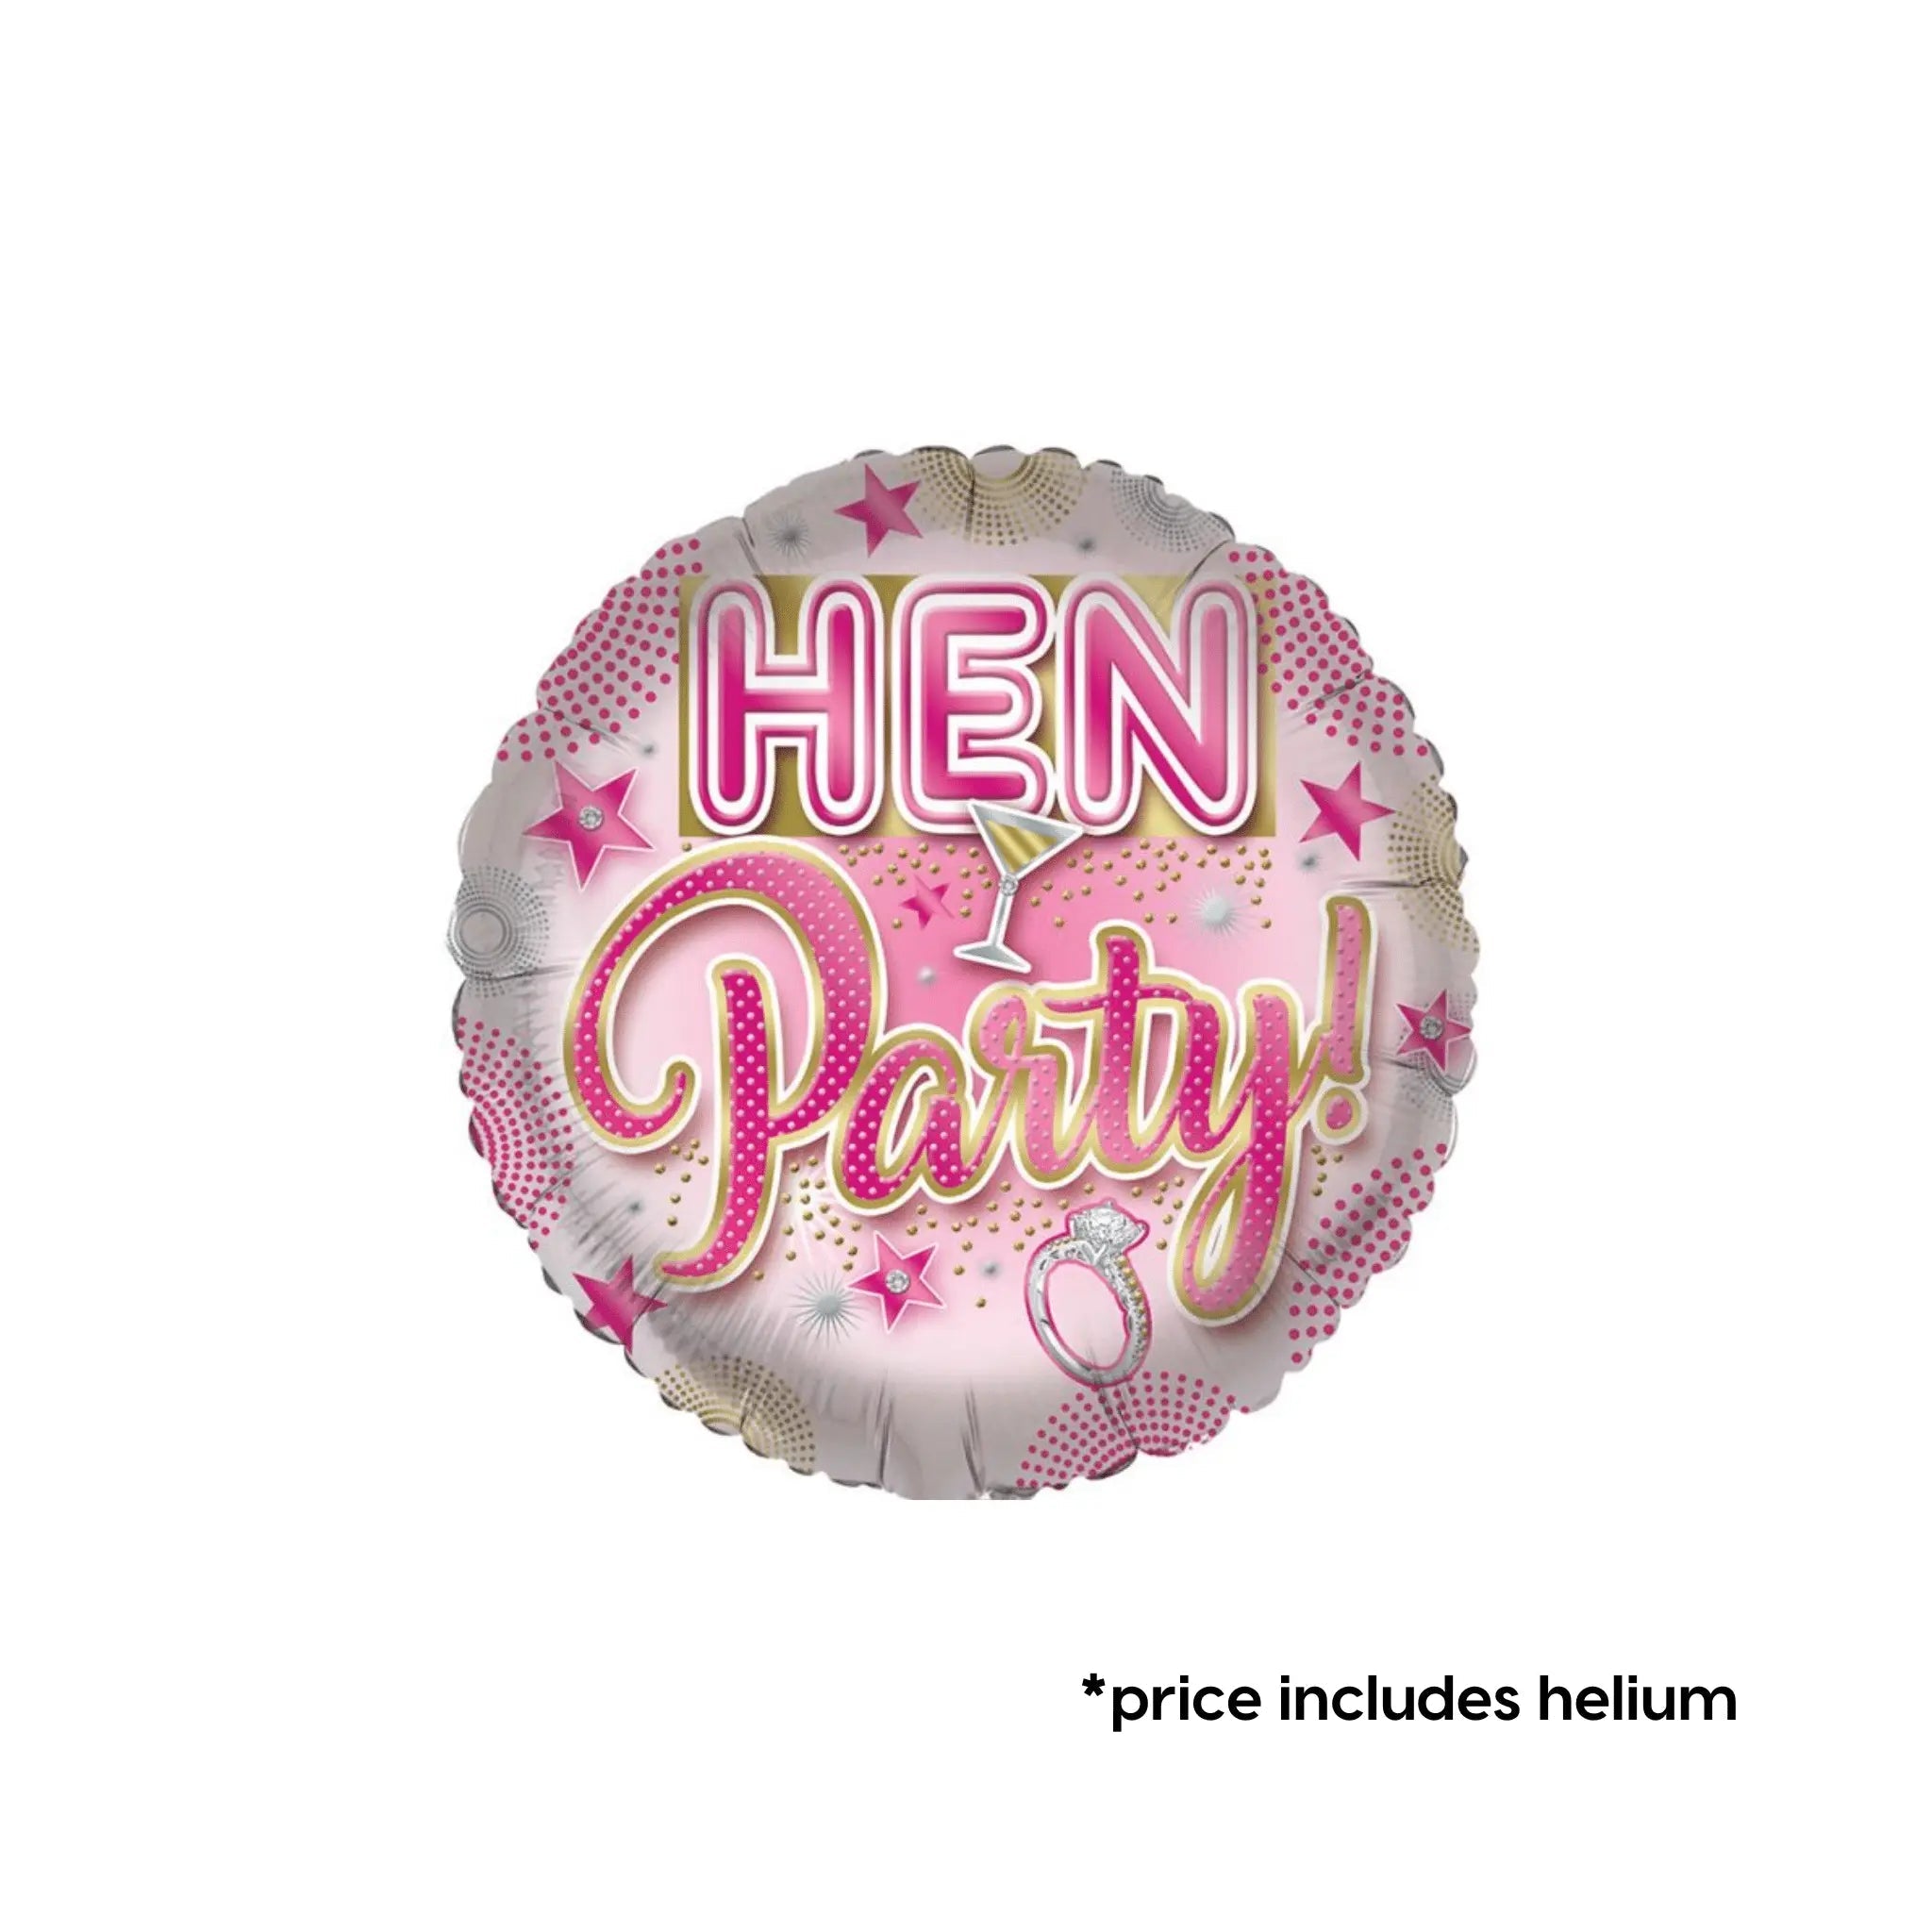 Hen Party Cocktails Balloon | The Party Hut